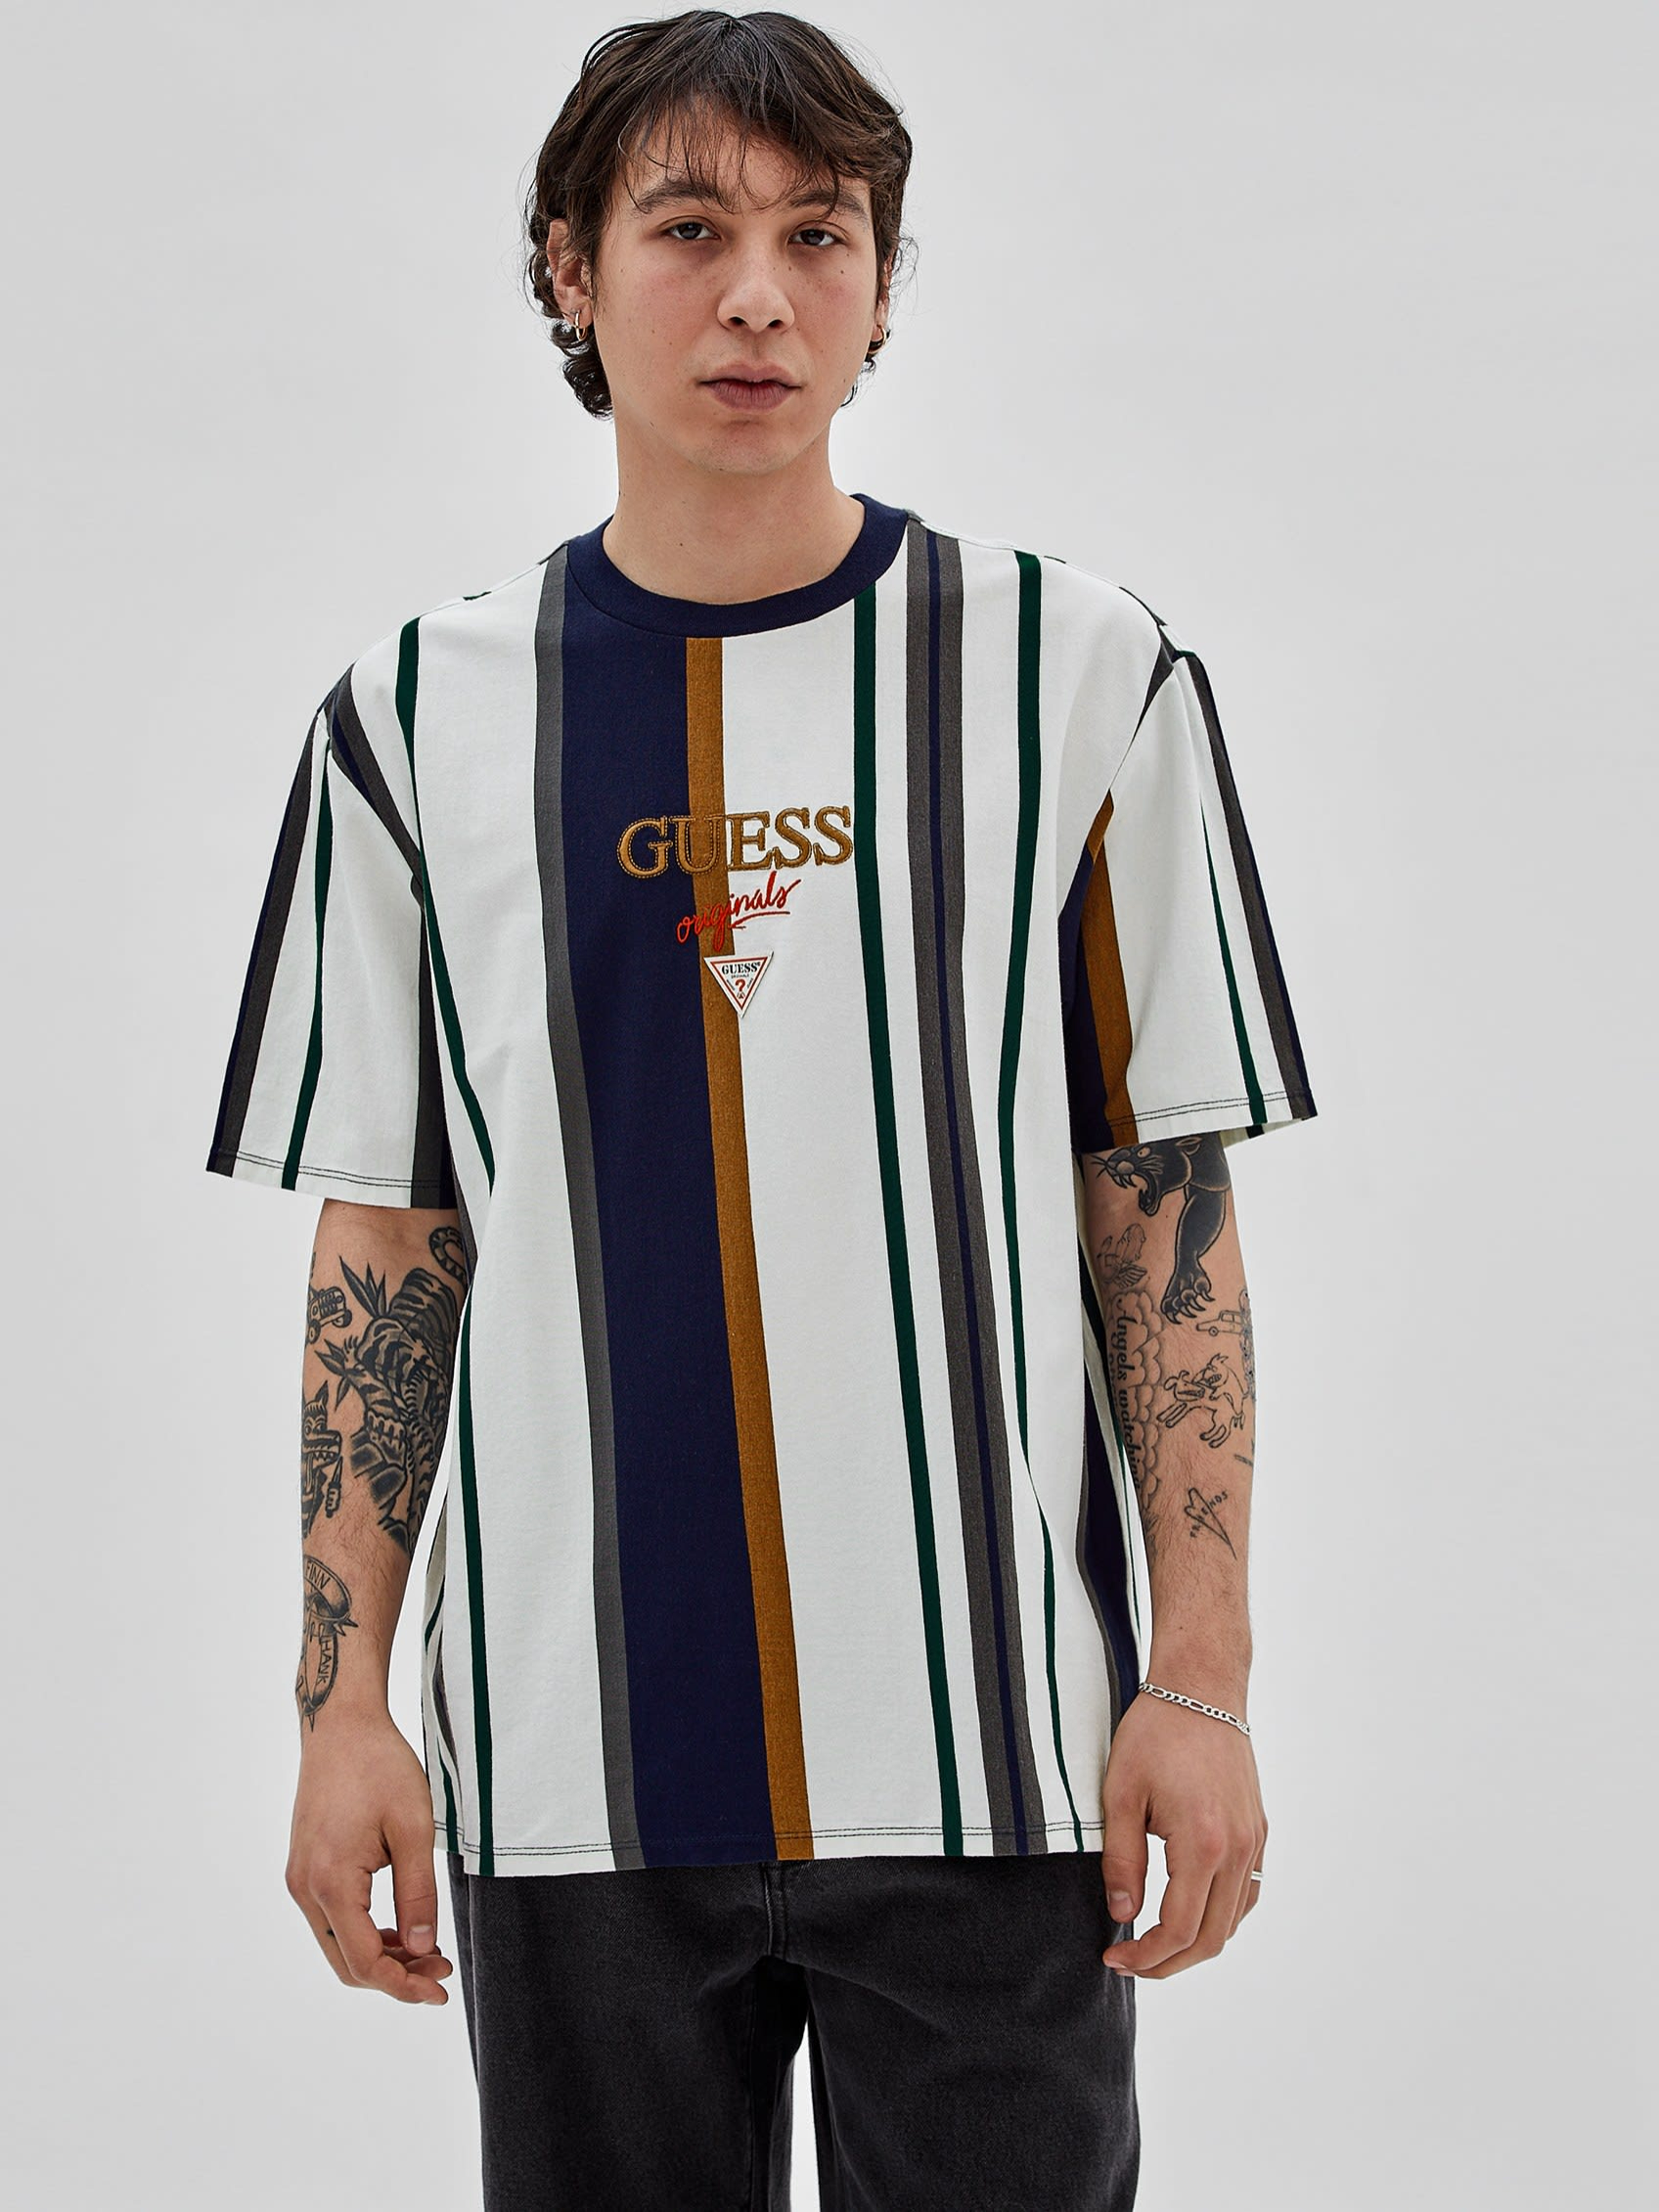 GUESS Originals ECO Striped Logo Tee | Guess Philippines